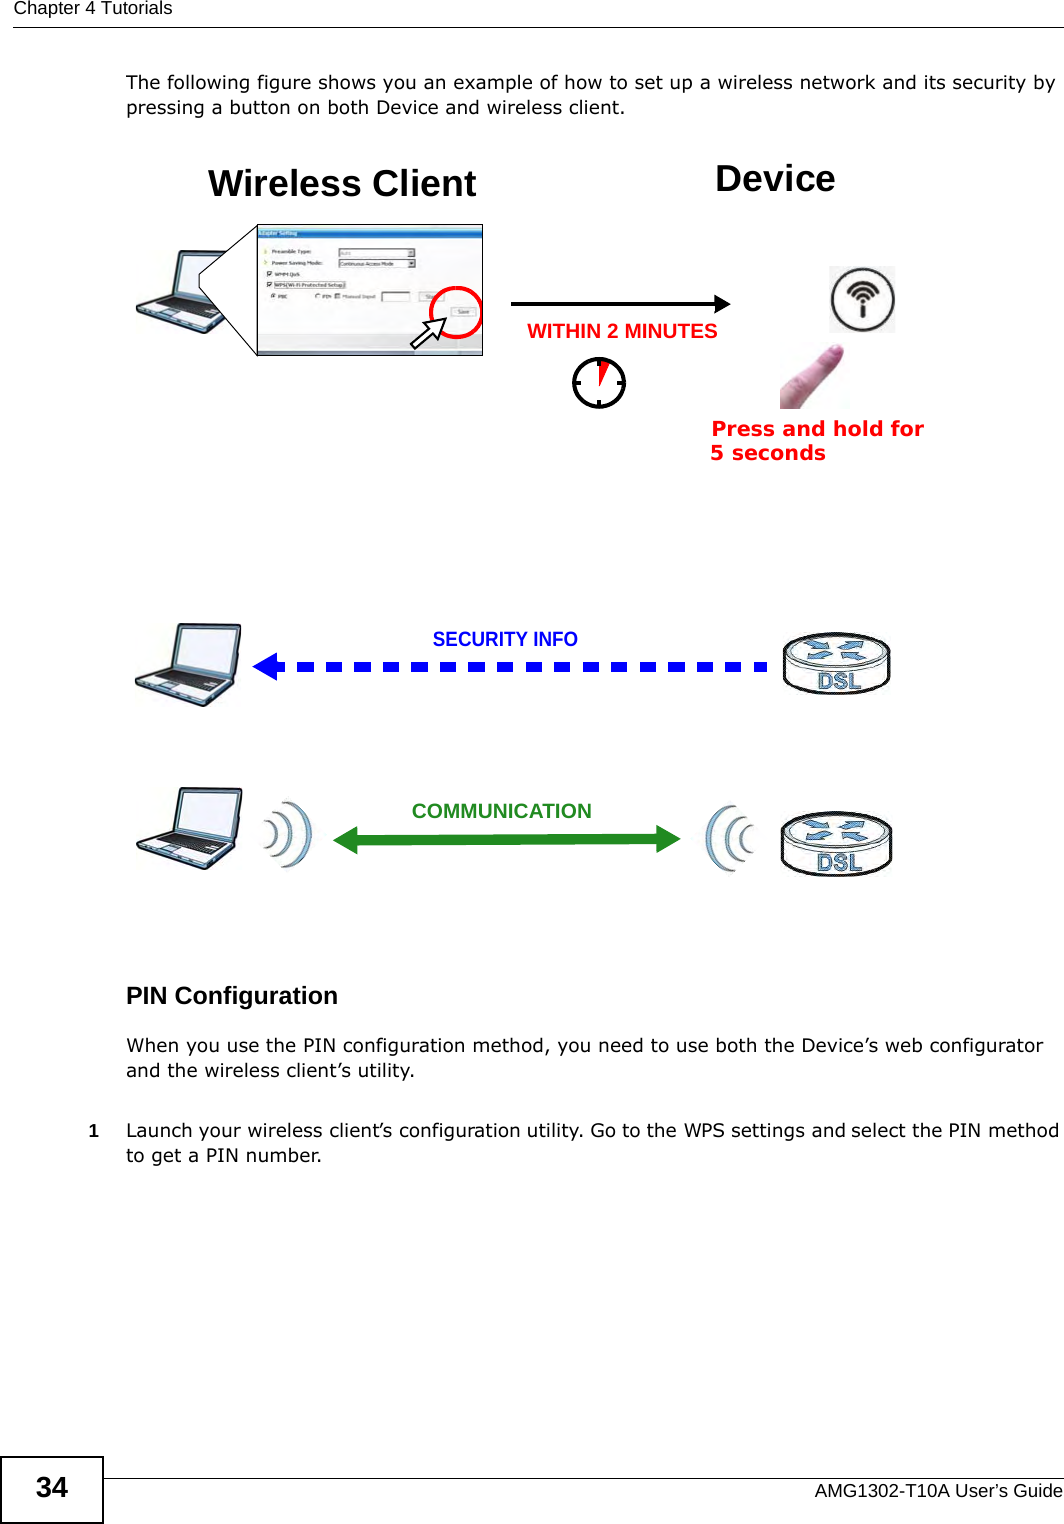 Chapter 4 TutorialsAMG1302-T10A User’s Guide34The following figure shows you an example of how to set up a wireless network and its security by pressing a button on both Device and wireless client.Example WPS Process: PBC MethodPIN ConfigurationWhen you use the PIN configuration method, you need to use both the Device’s web configurator and the wireless client’s utility.1Launch your wireless client’s configuration utility. Go to the WPS settings and select the PIN method to get a PIN number.   Wireless Client DeviceSECURITY INFOCOMMUNICATIONWITHIN 2 MINUTESPress and hold for   5 seconds